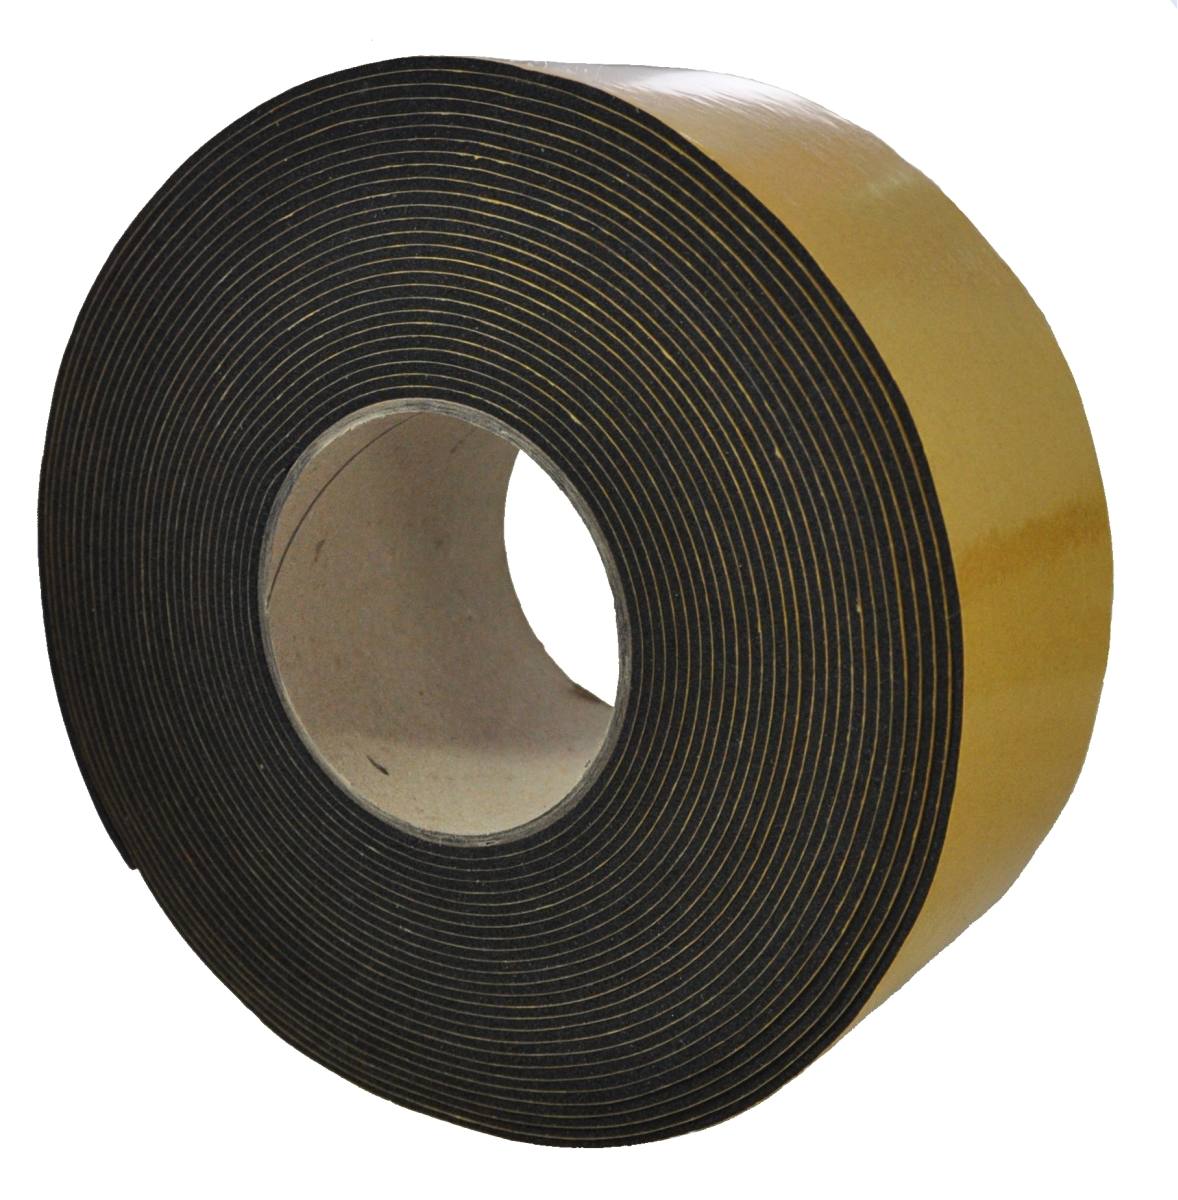 S-K-S EPDM 1mmx9mmx10m black self-adhesive on one side